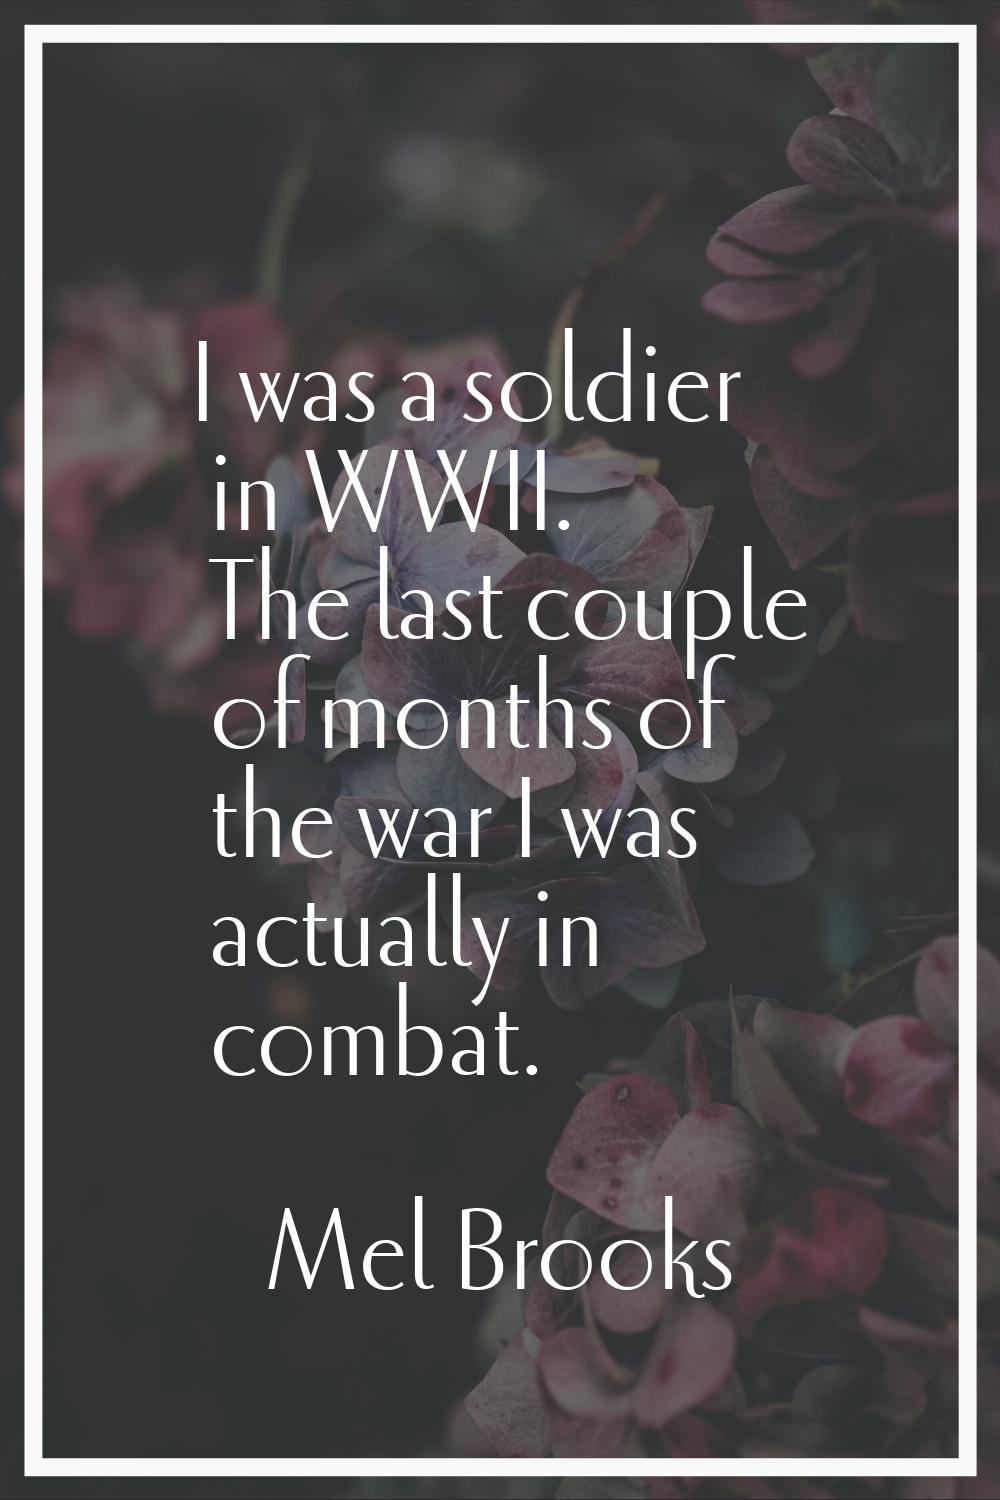 I was a soldier in WWII. The last couple of months of the war I was actually in combat.